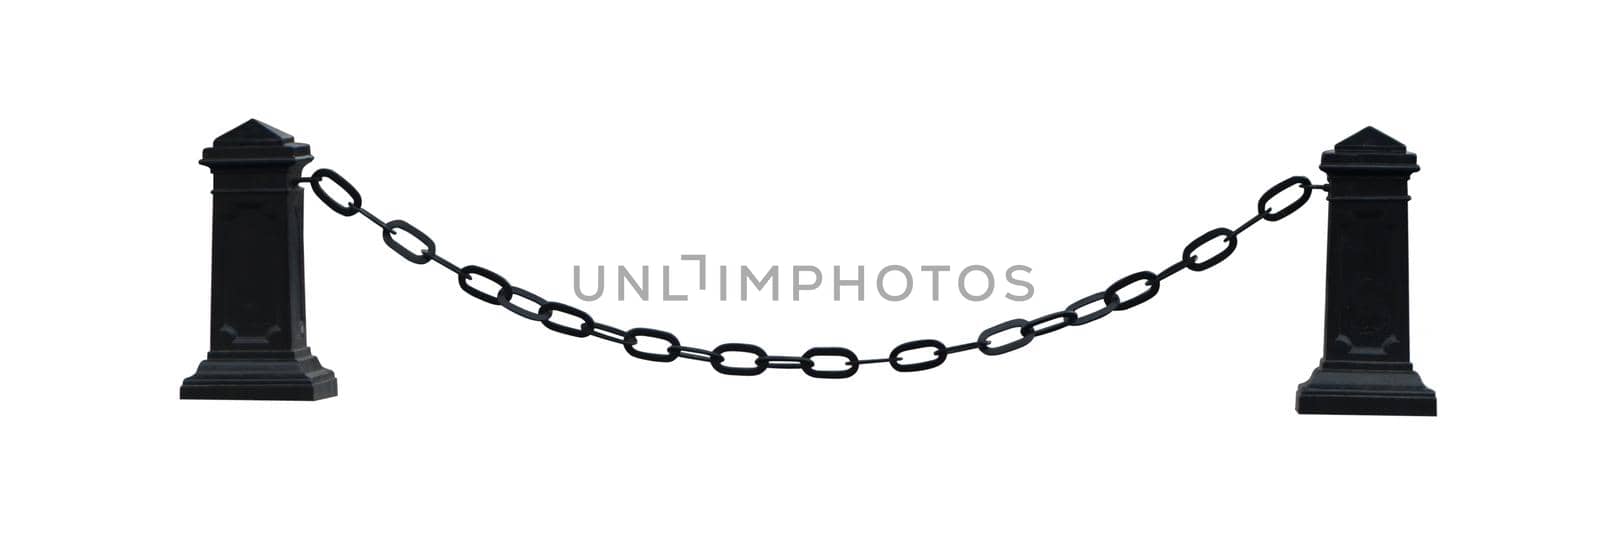 Stretched metal chain between the pillars on a white background